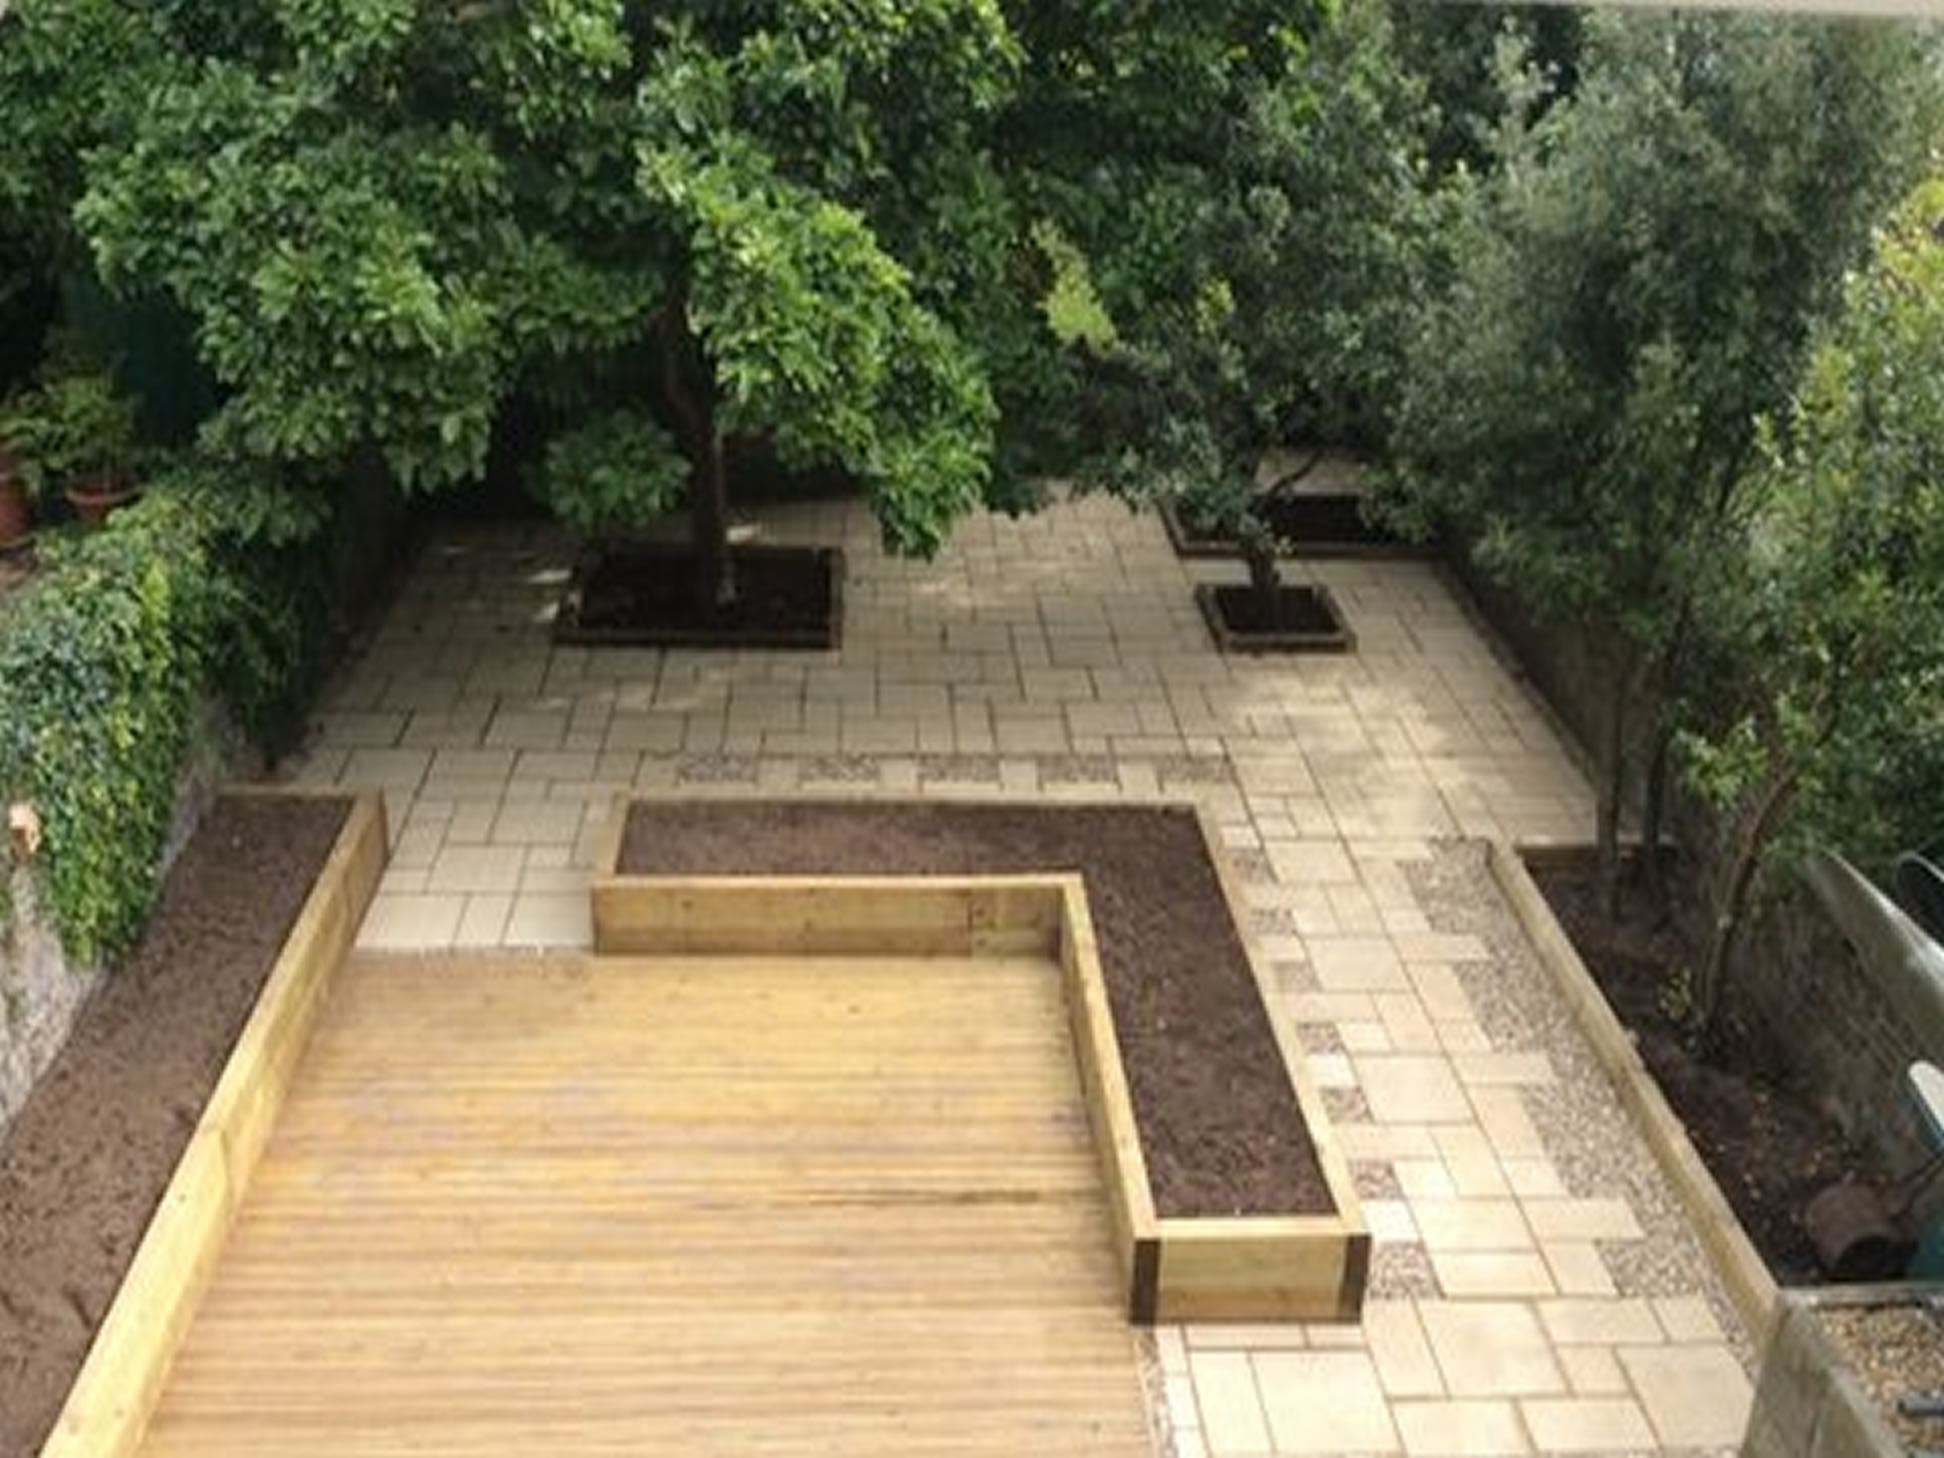 Patio - Awesome Garden Patio Paving 2y01 to Design Landscaping and ...